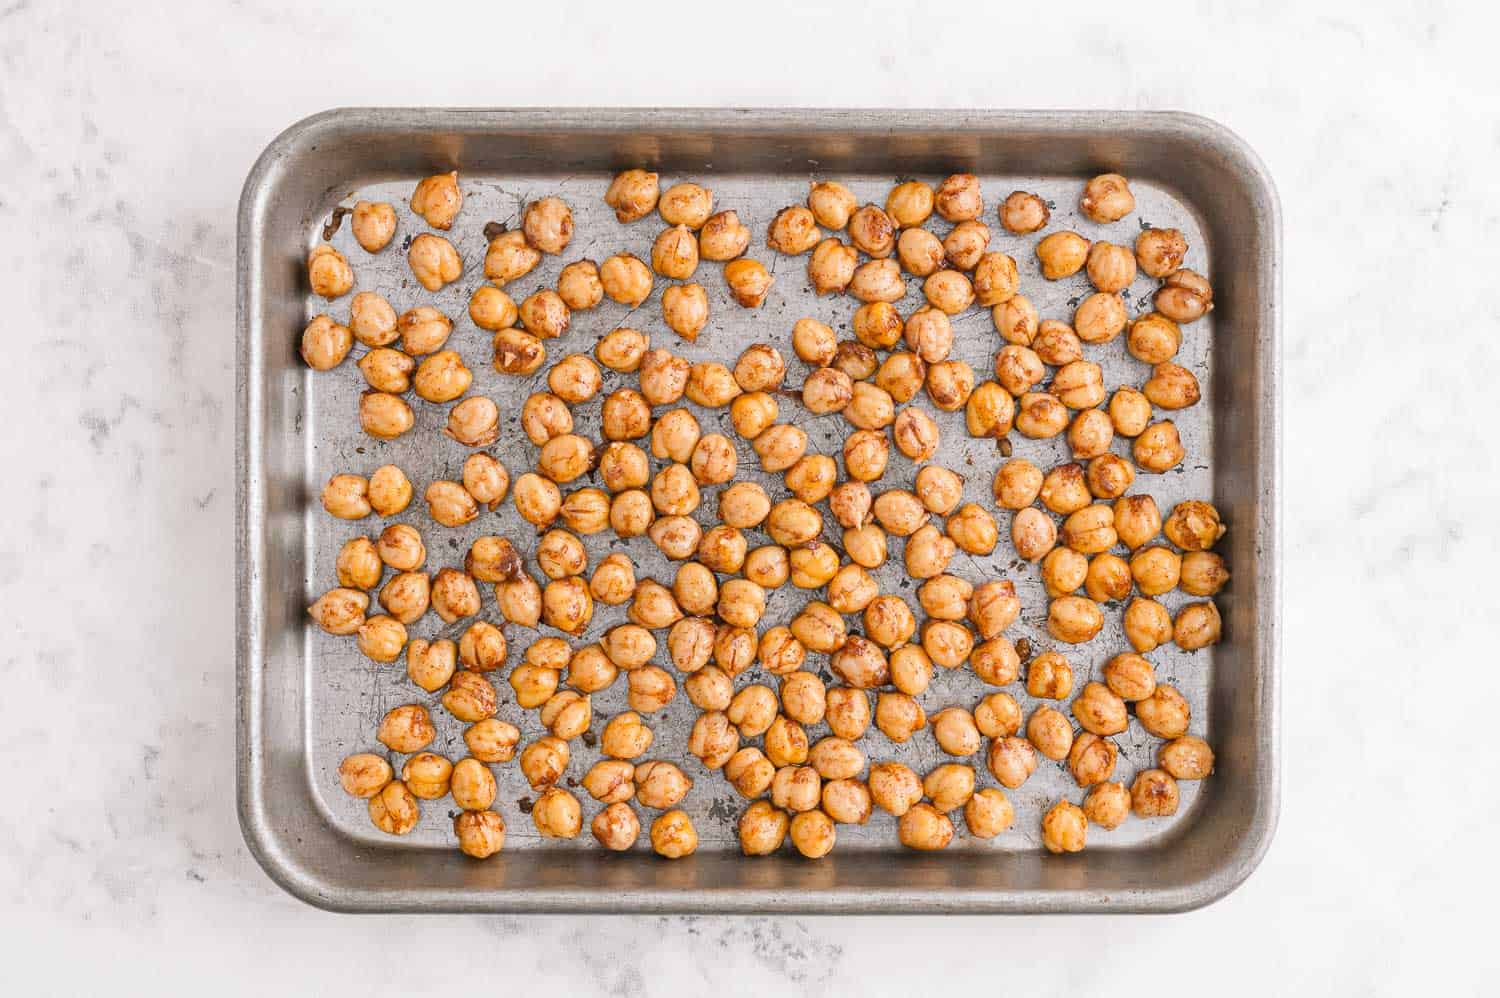 Unbaked chickpeas on a sheet pan.